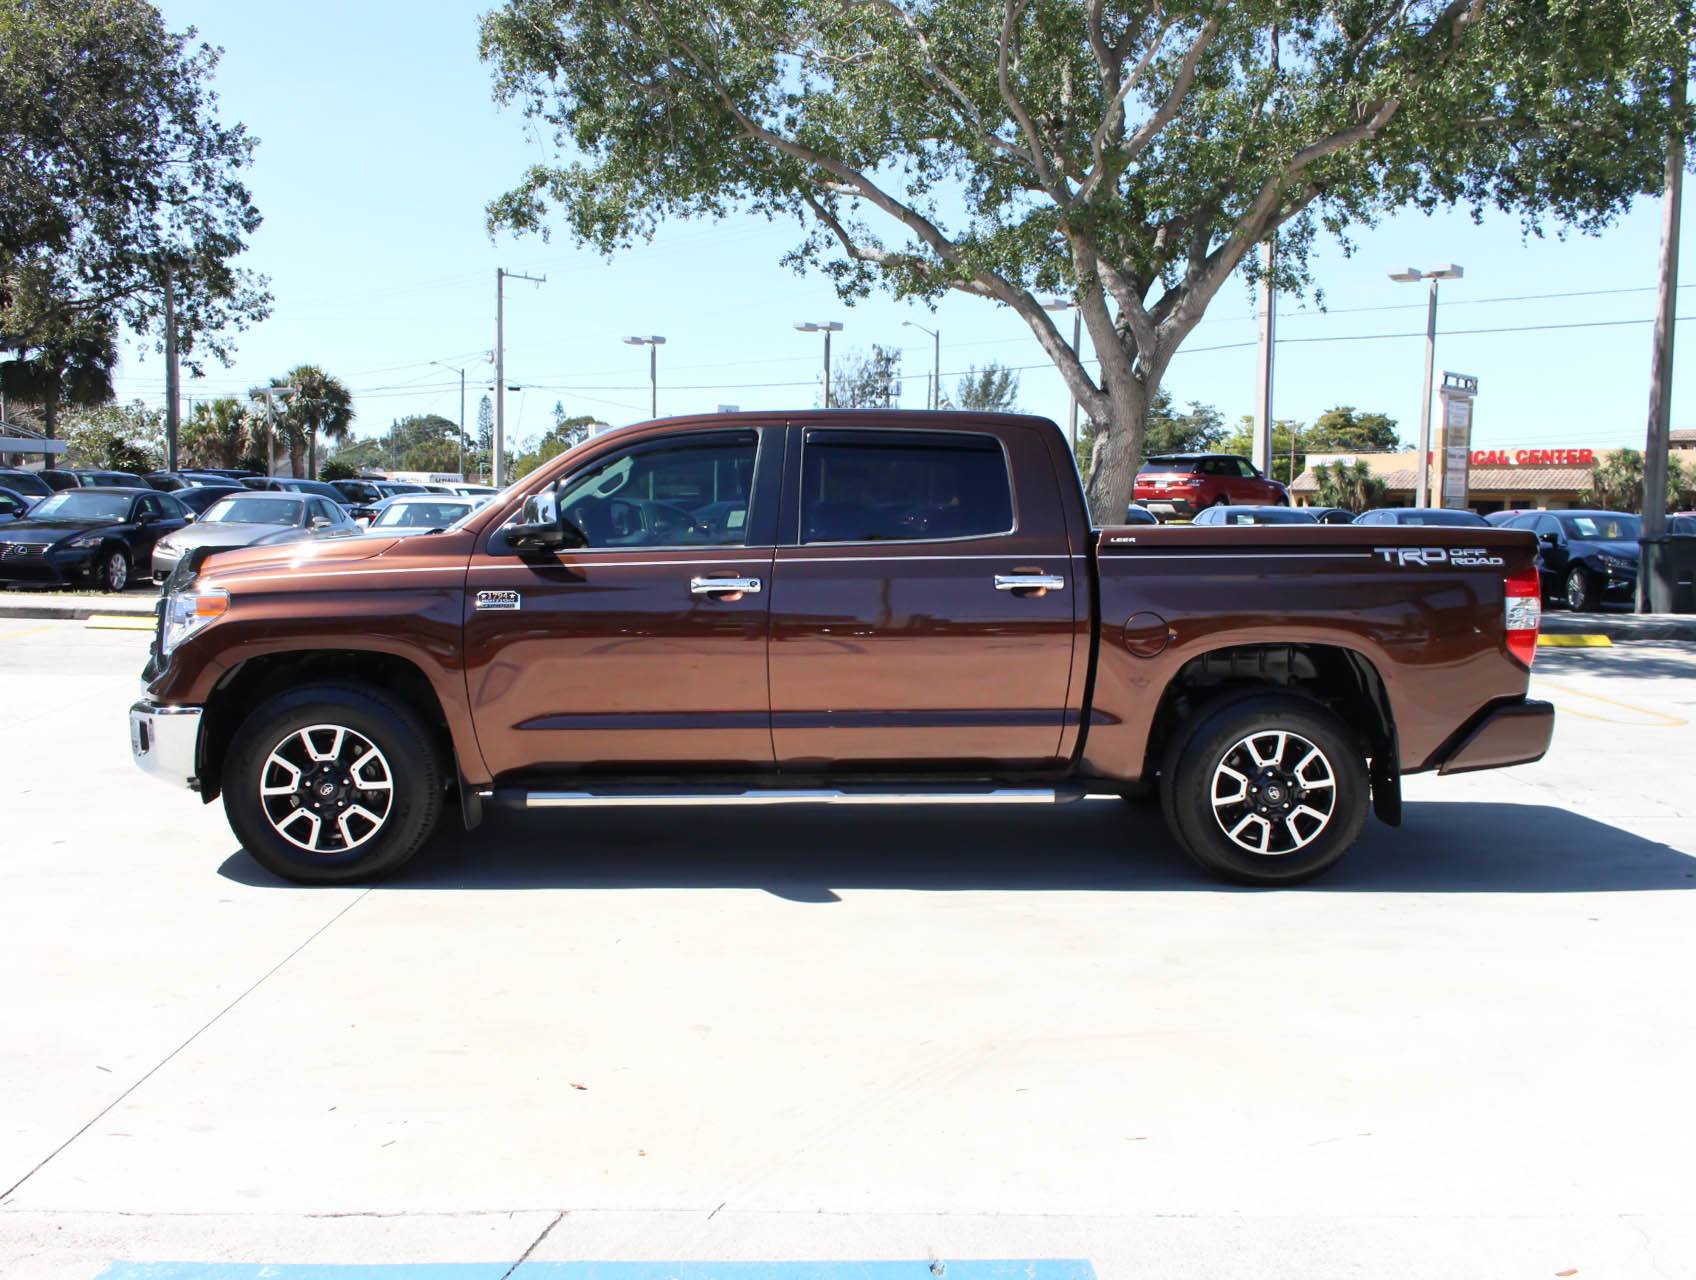 Used 2016 TOYOTA TUNDRA 1794 Edition for sale in WEST PALM | 92272